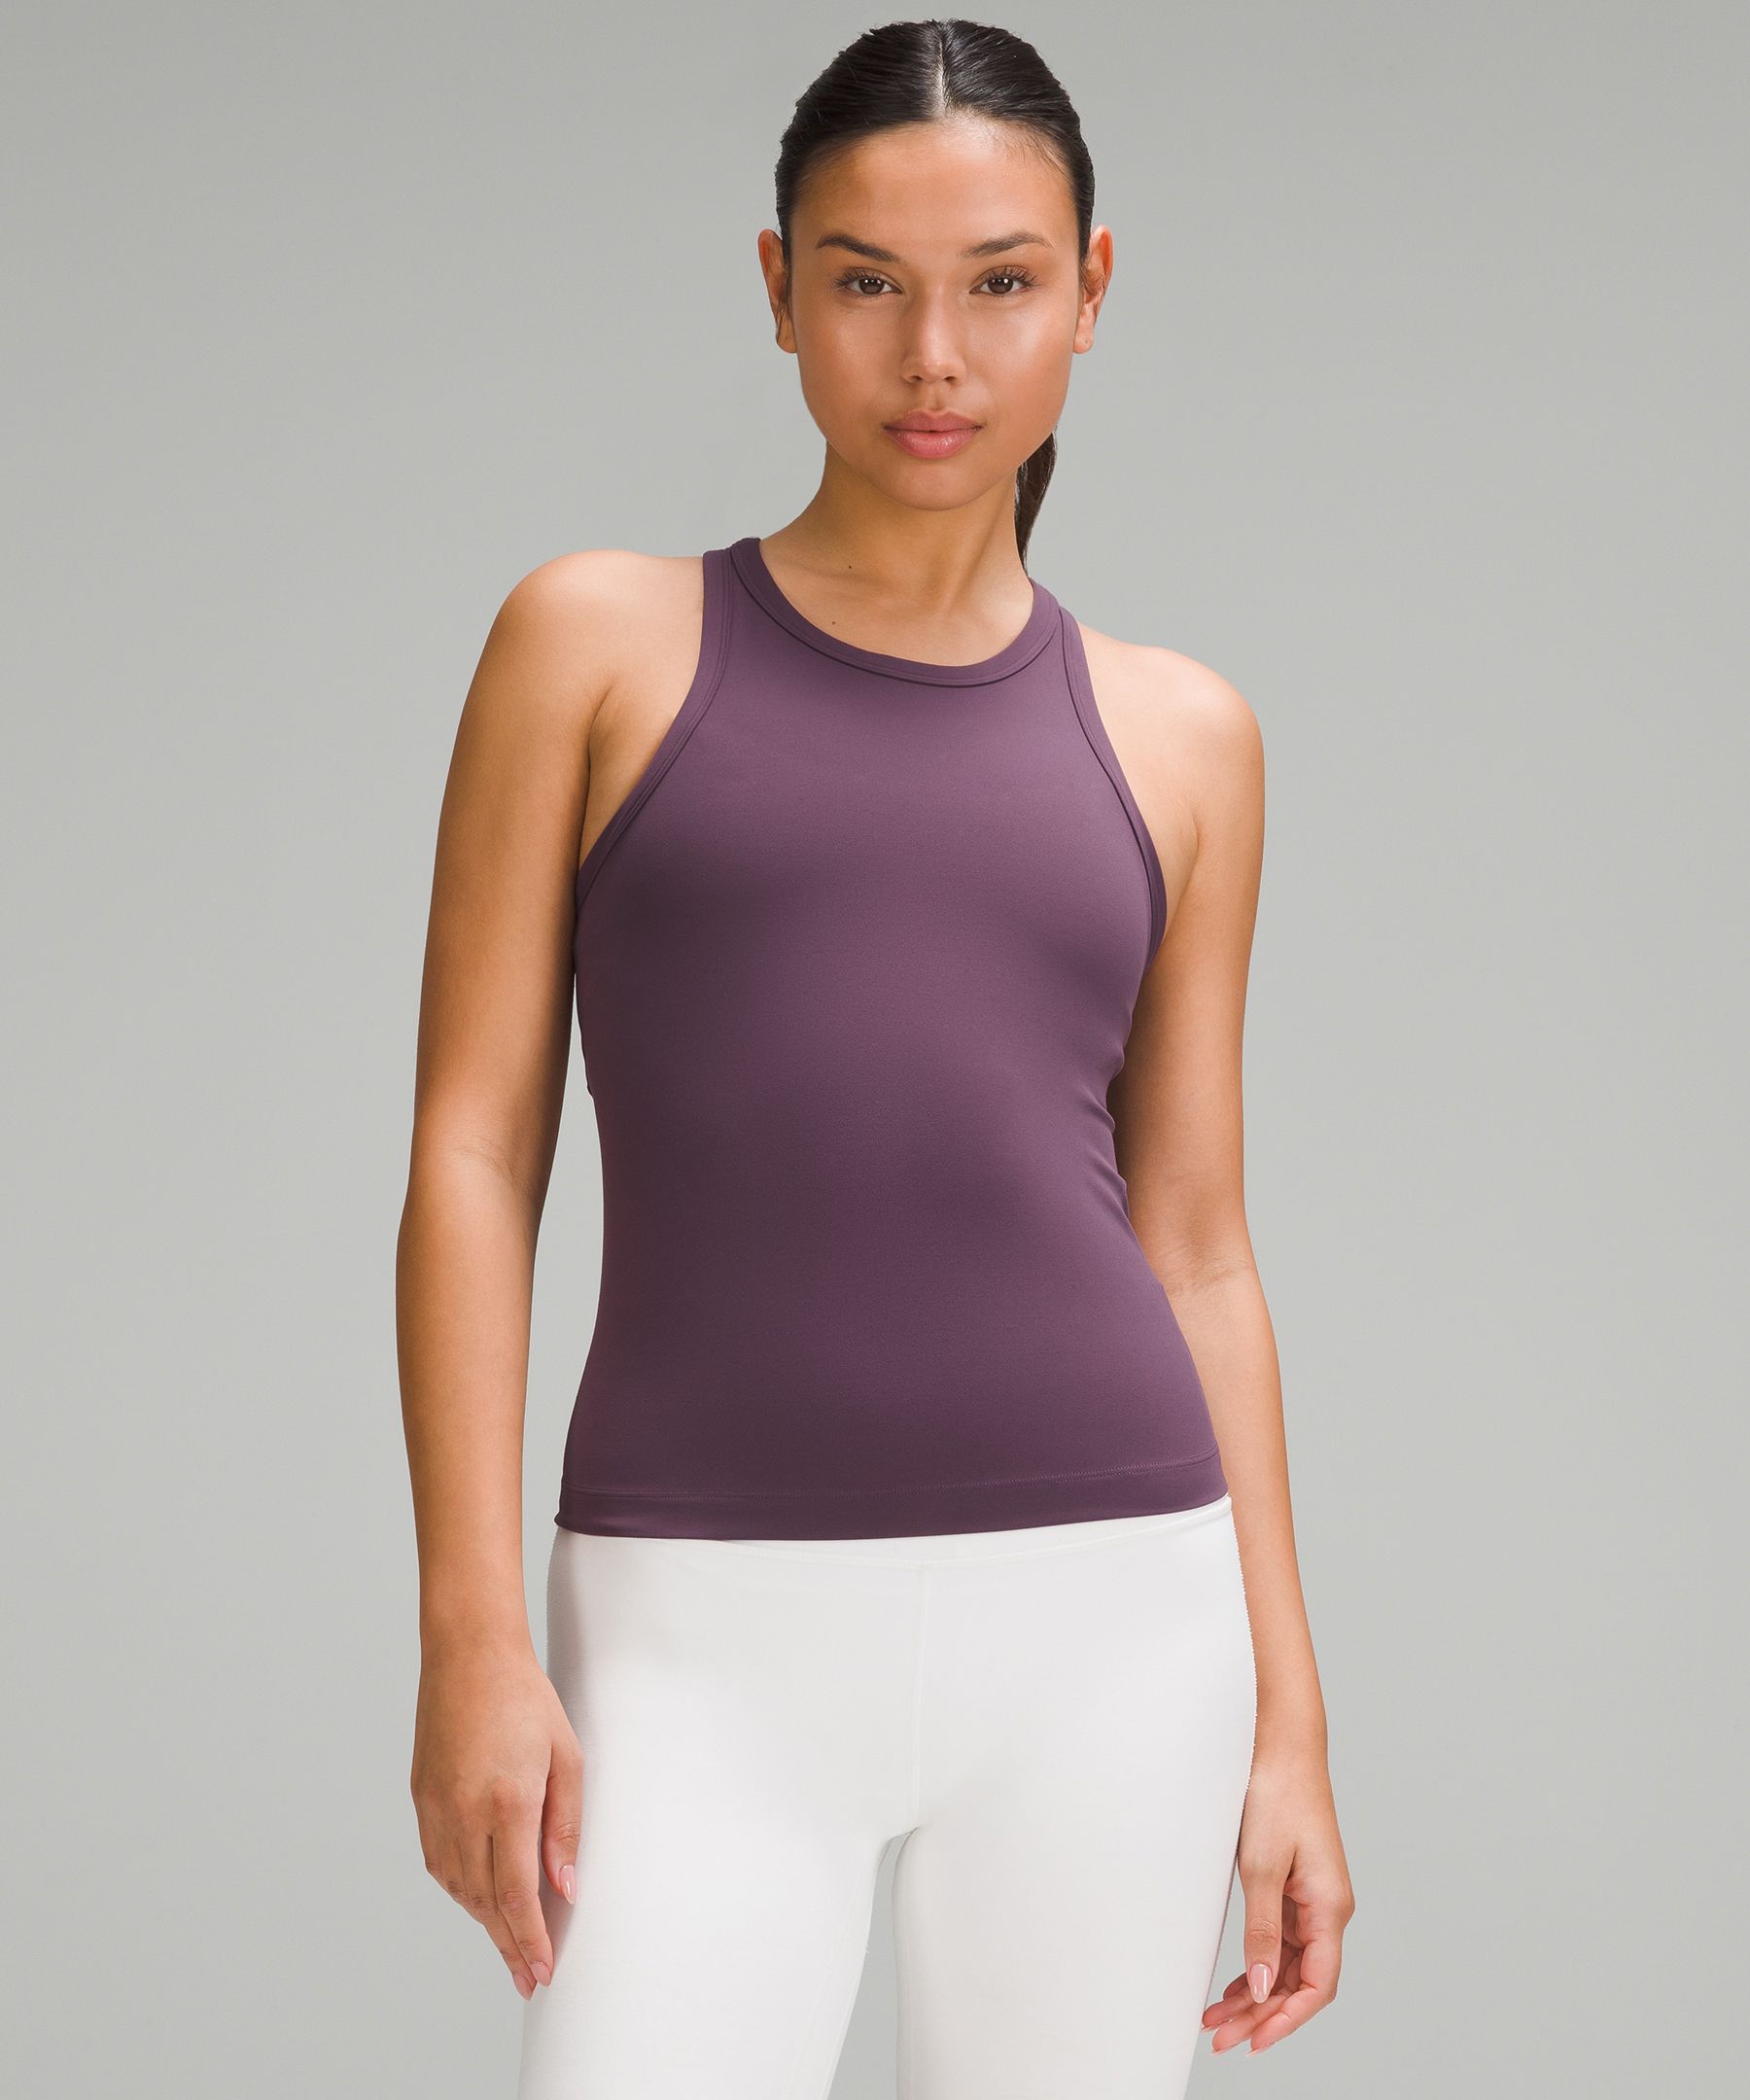 Free People UV Protection Athletic Tank Tops for Women